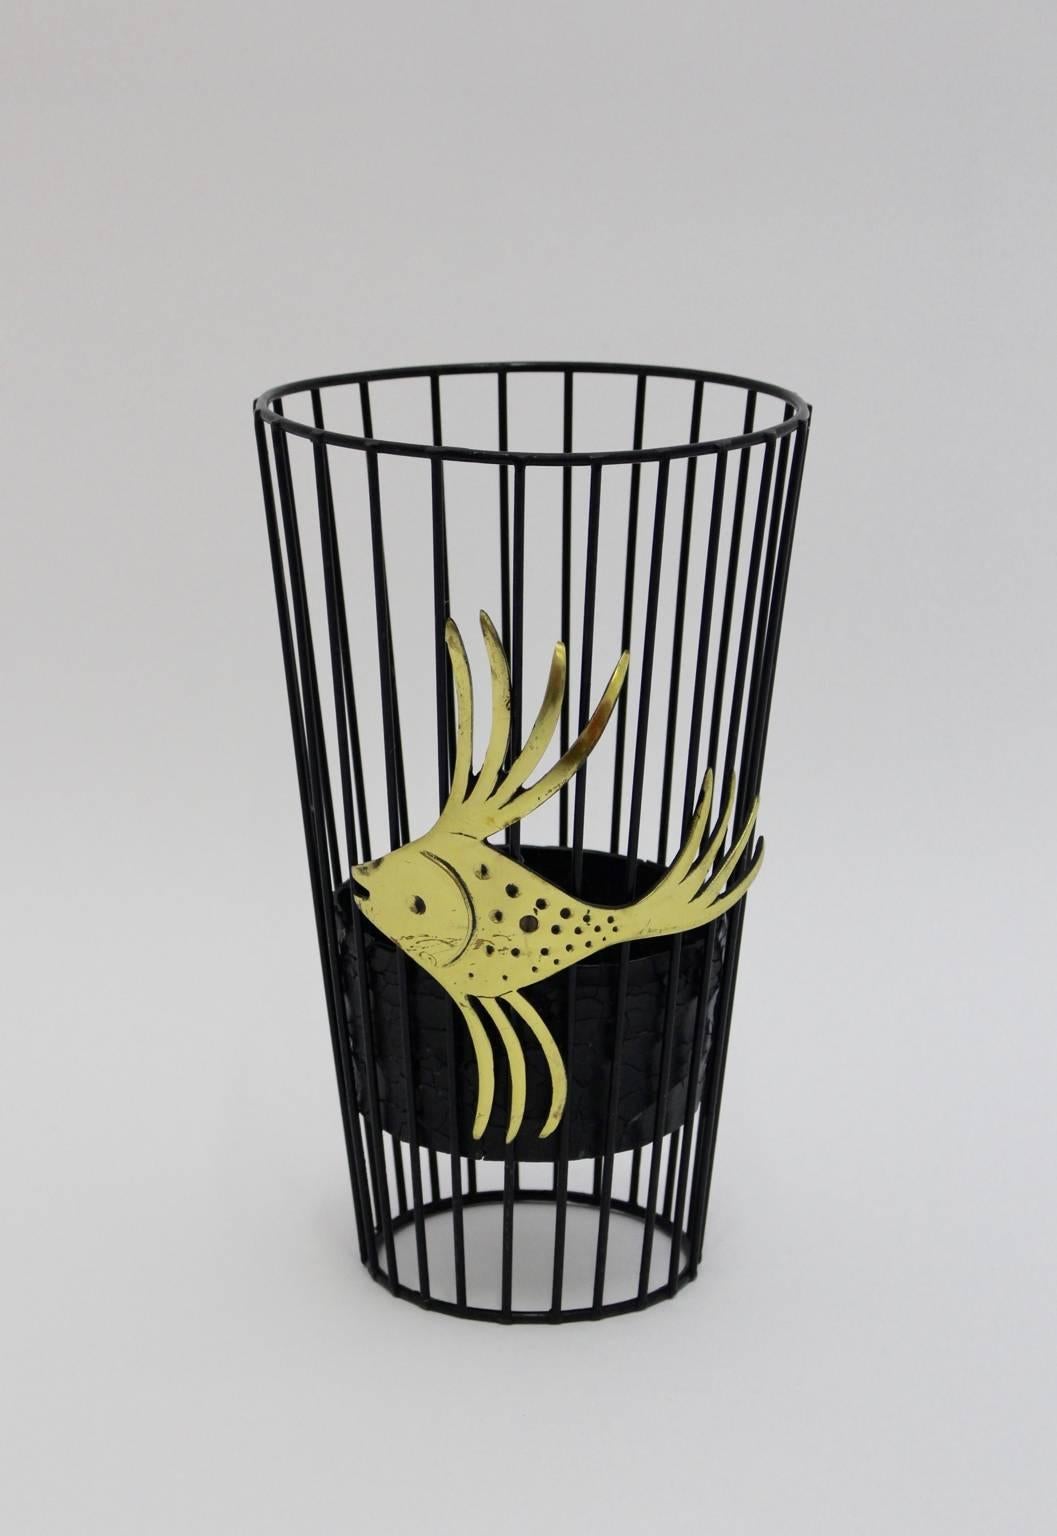 Mid Century Modern vintage black metal and brass umbrella stand was designed by Walter Bosse in Vienna.
Also the umbrella stand was made of black wire steel with drip tray inside.
A lovely brass fish decorates the umbrella stand outside.

all